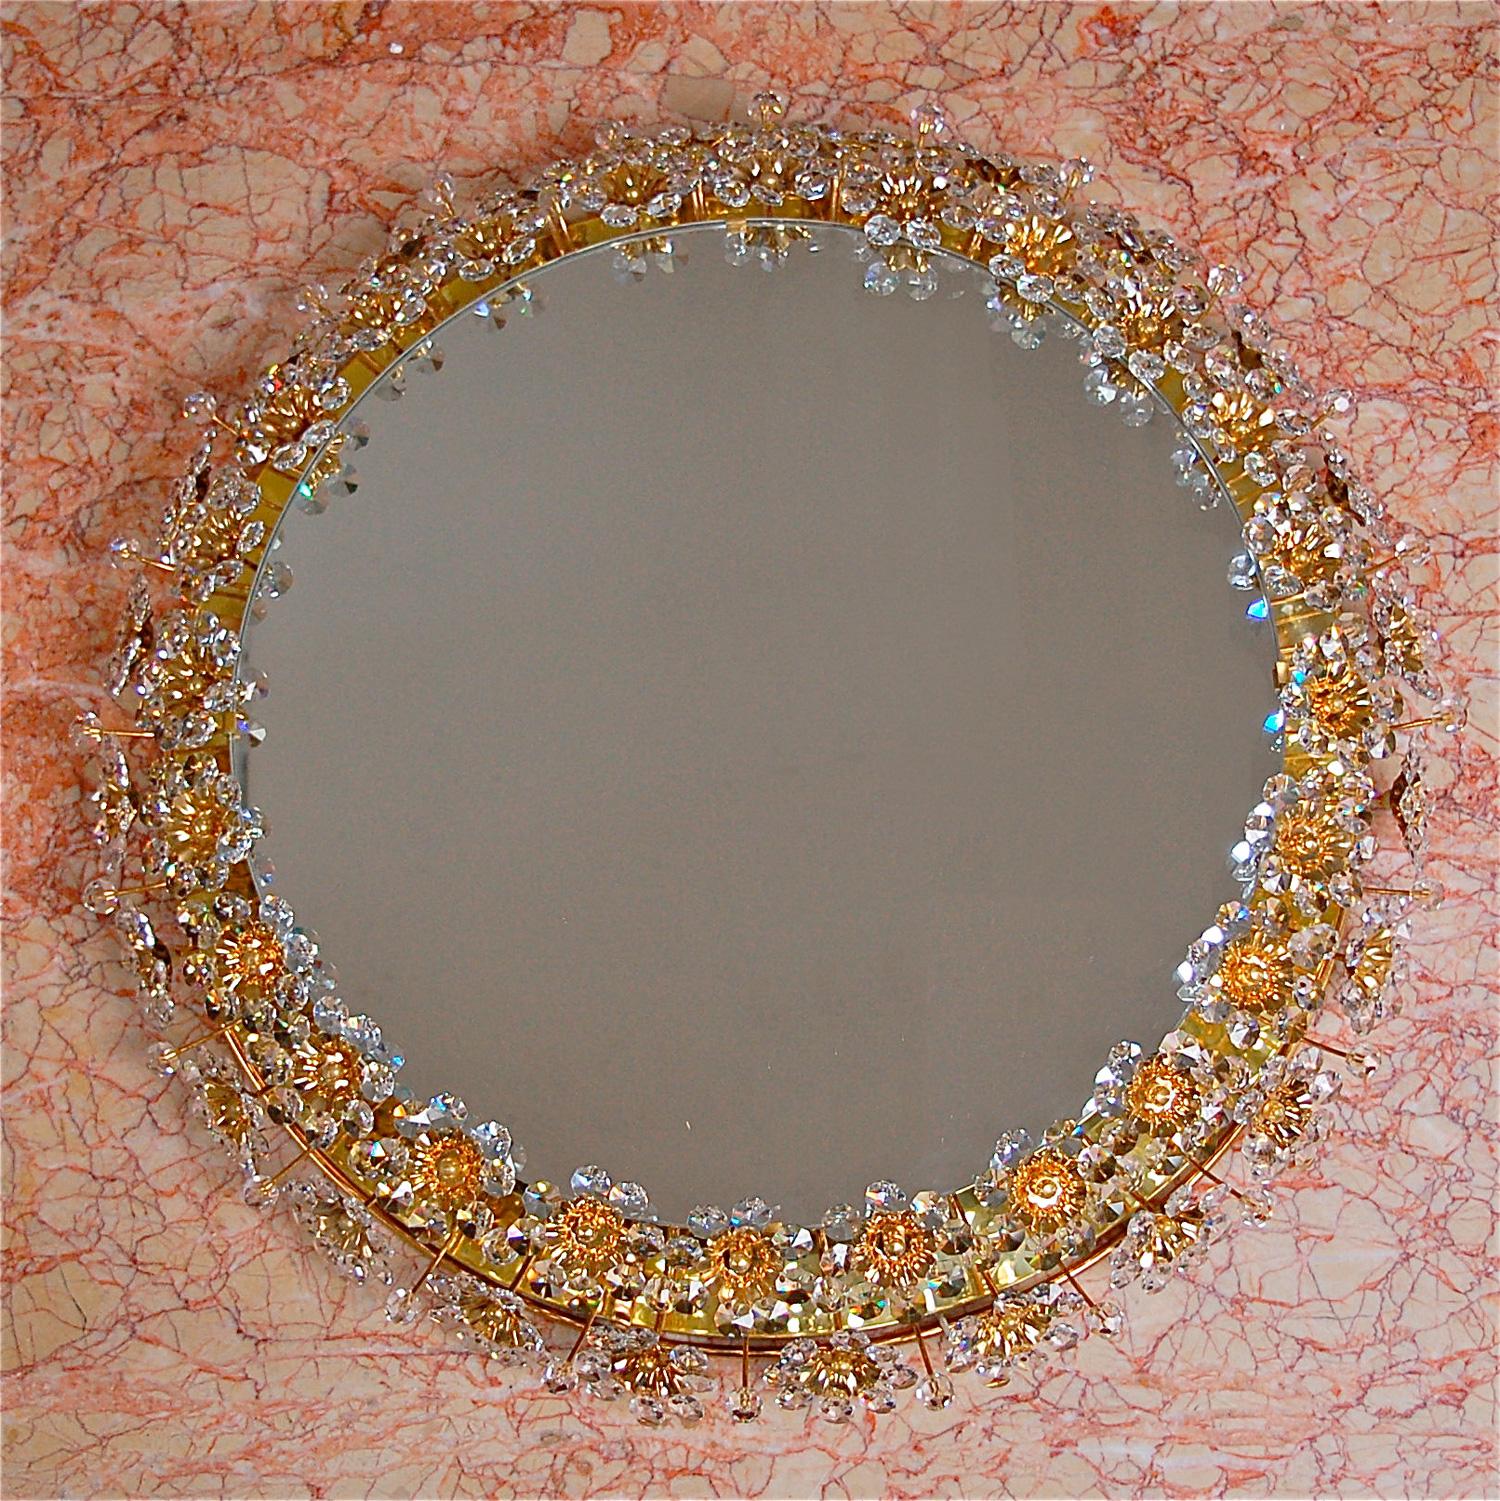 Mid-20th century illuminated circular mirror by German manufacturer Palwa. The mirror is framed with a double border of delicate flowers and petals made from faceted crystals and beads that sparkle in the light. The frame is made from gold colored